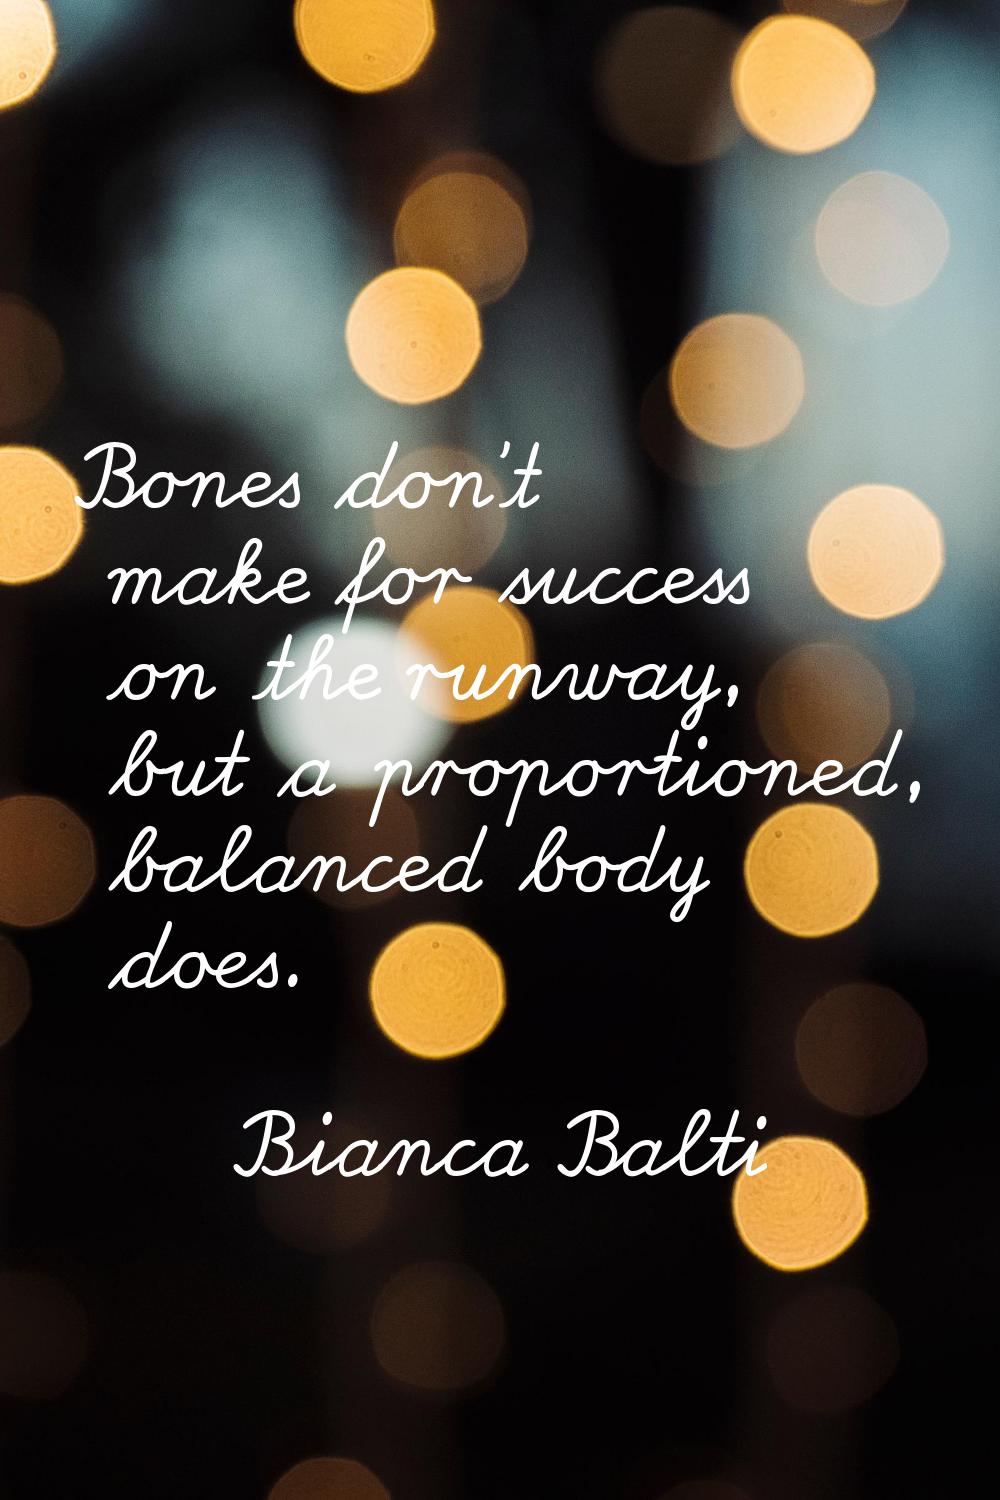 Bones don't make for success on the runway, but a proportioned, balanced body does.